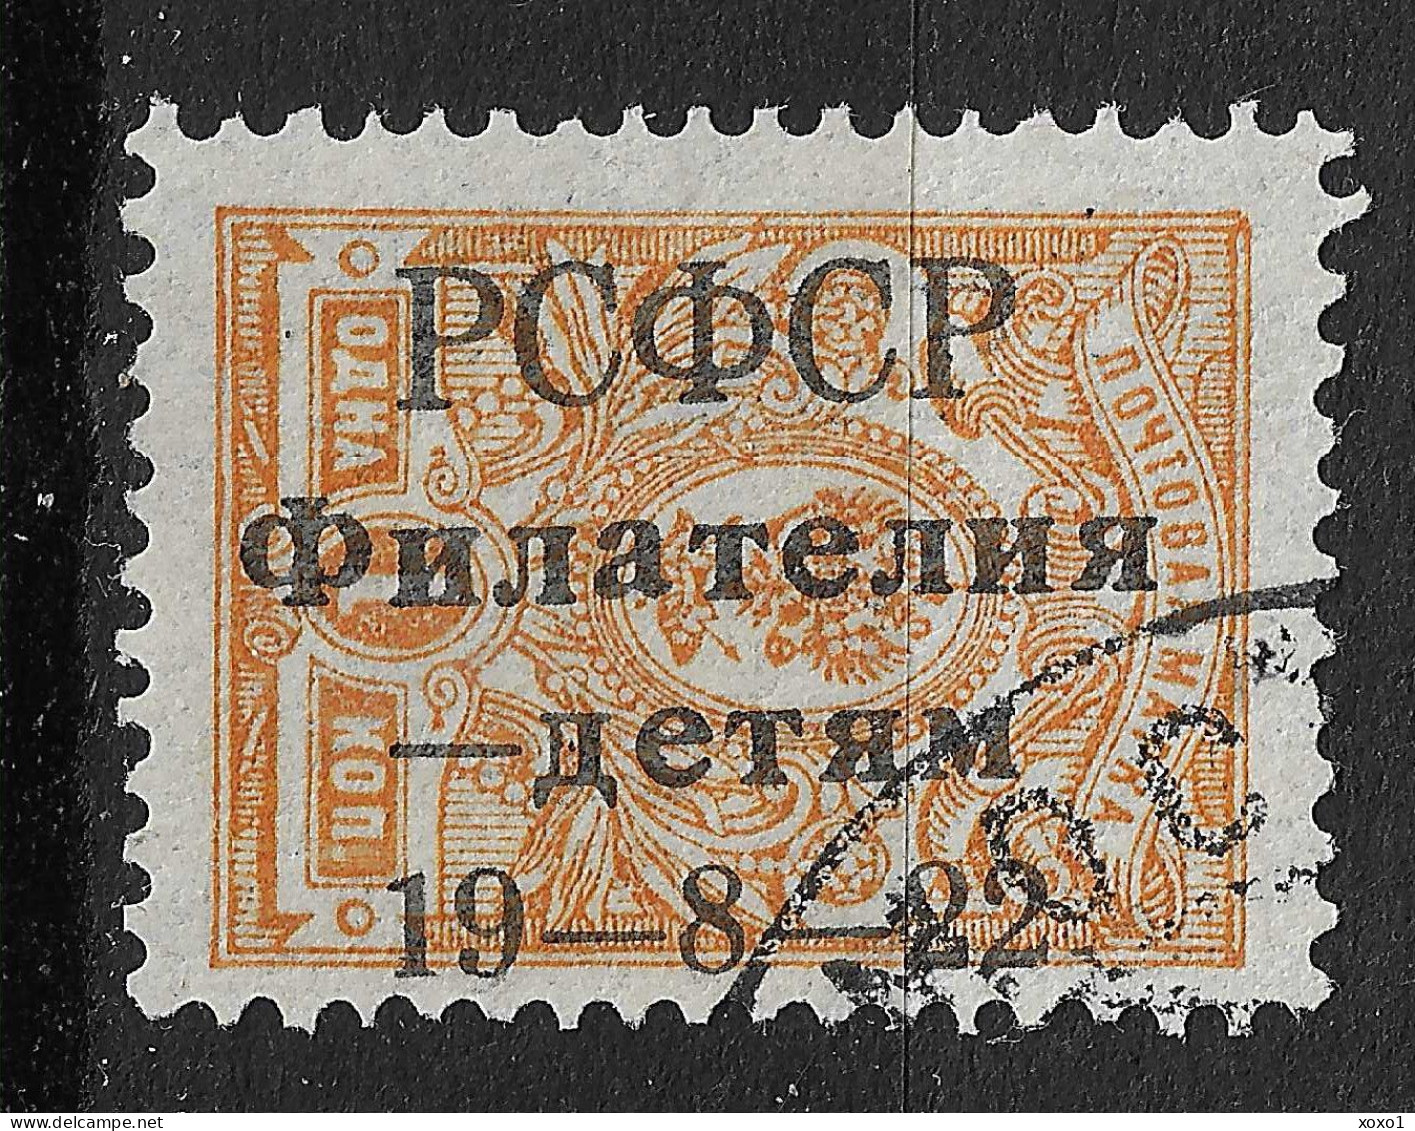 RSFSR Russia 1922 MiNr. 185 I A  PHILATELY FOR CHILDREN 1v Used  800.00 € - Gebraucht